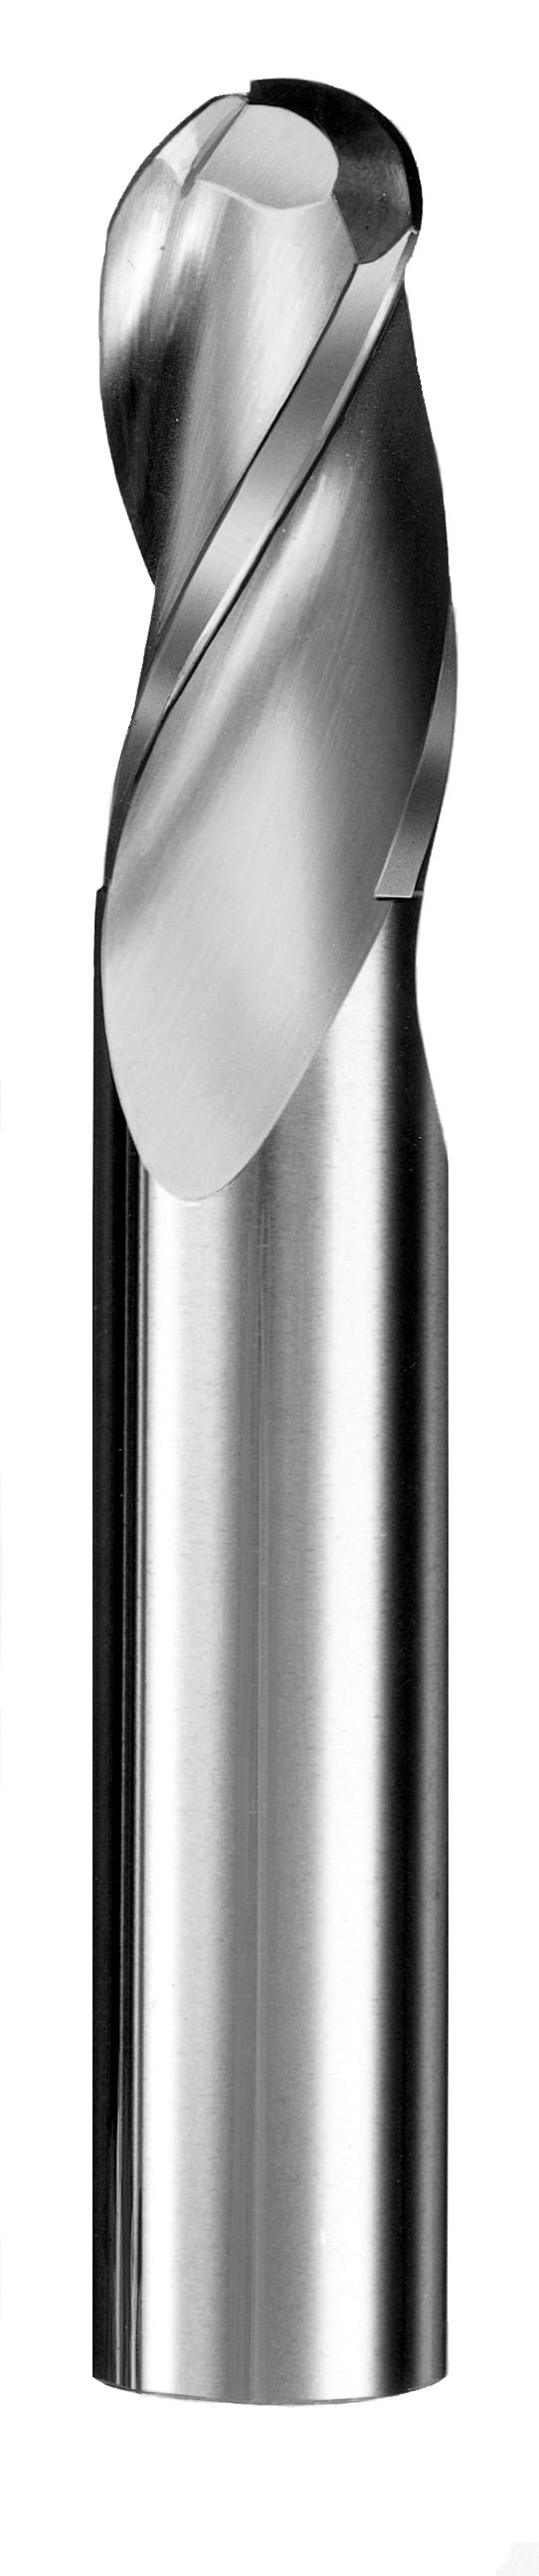 7/32" Dia, 3 Flute, Ball Nose End Mill - 30528